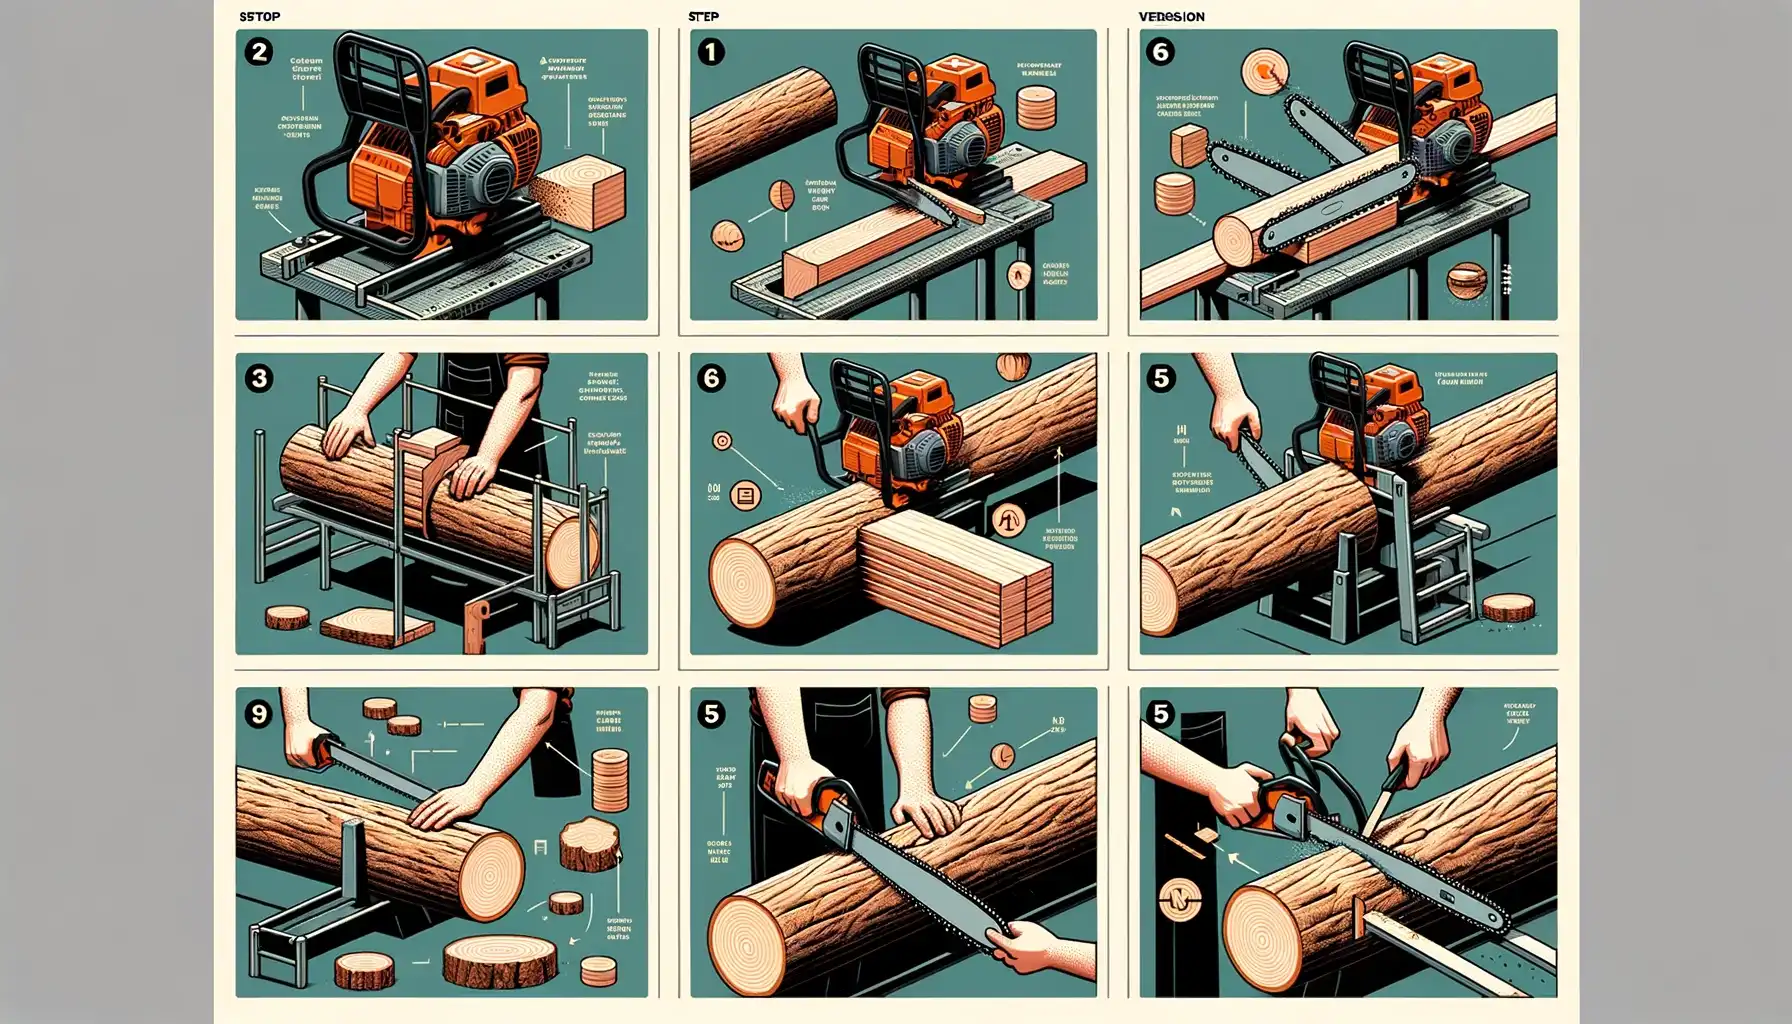 Chainsaw Mill Guide